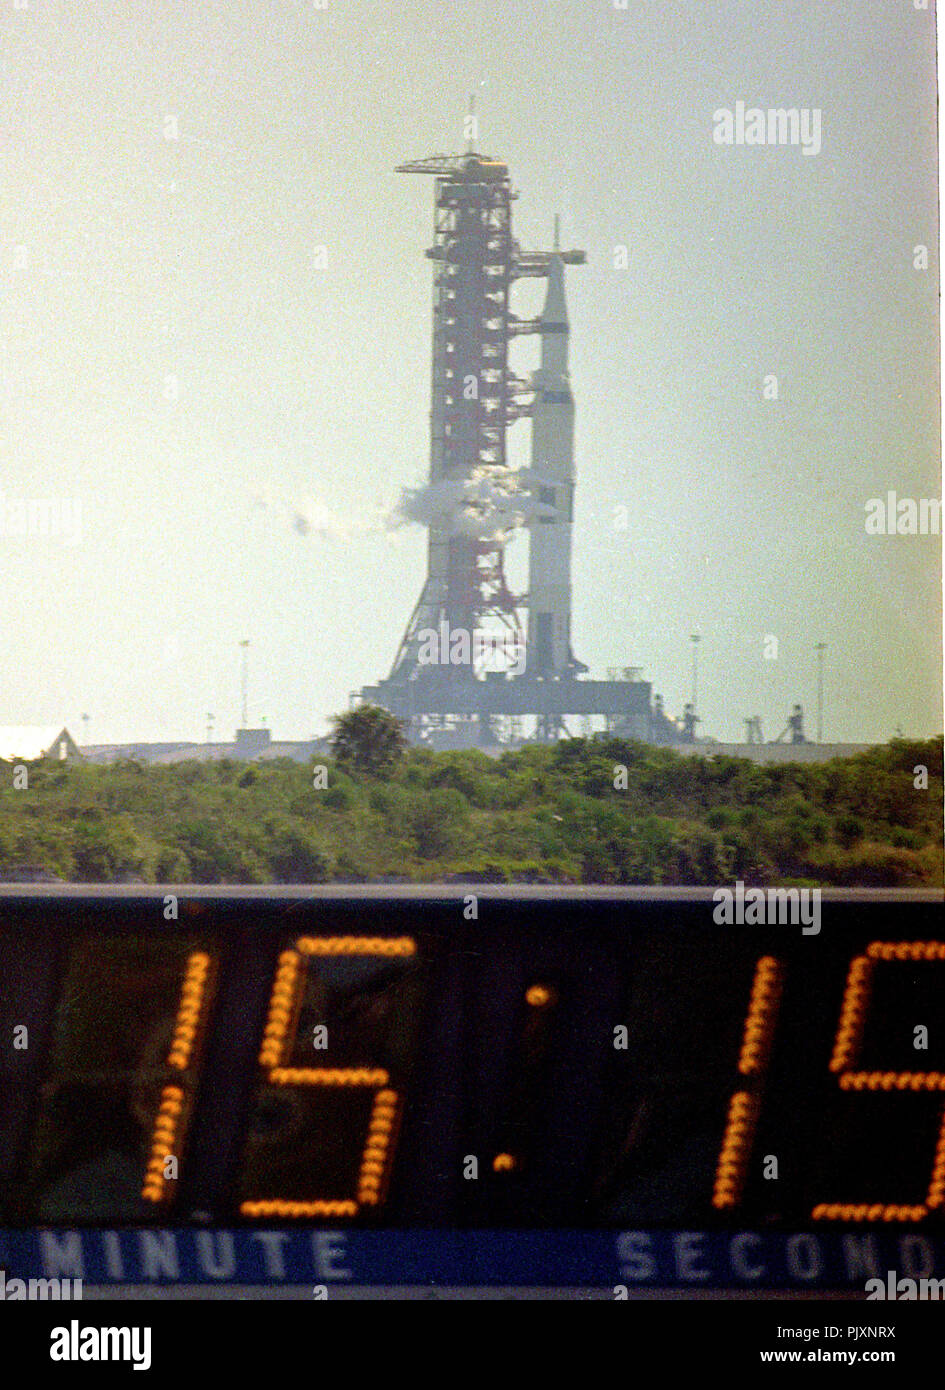 The Saturn V SA-506 launch vehicle with the Apollo 11 astronauts and equipment aboard, is pictured fifteen minutes and fifteen seconds prior to lift-off from Launch Complex 39A at the Kennedy Space Center at Cape Canaveral, Florida on Wednesday, July 16, 1969.  It will launch the first manned mission to land on the Moon.  Credit: Ron Sachs / CNP /MediaPunch Stock Photo